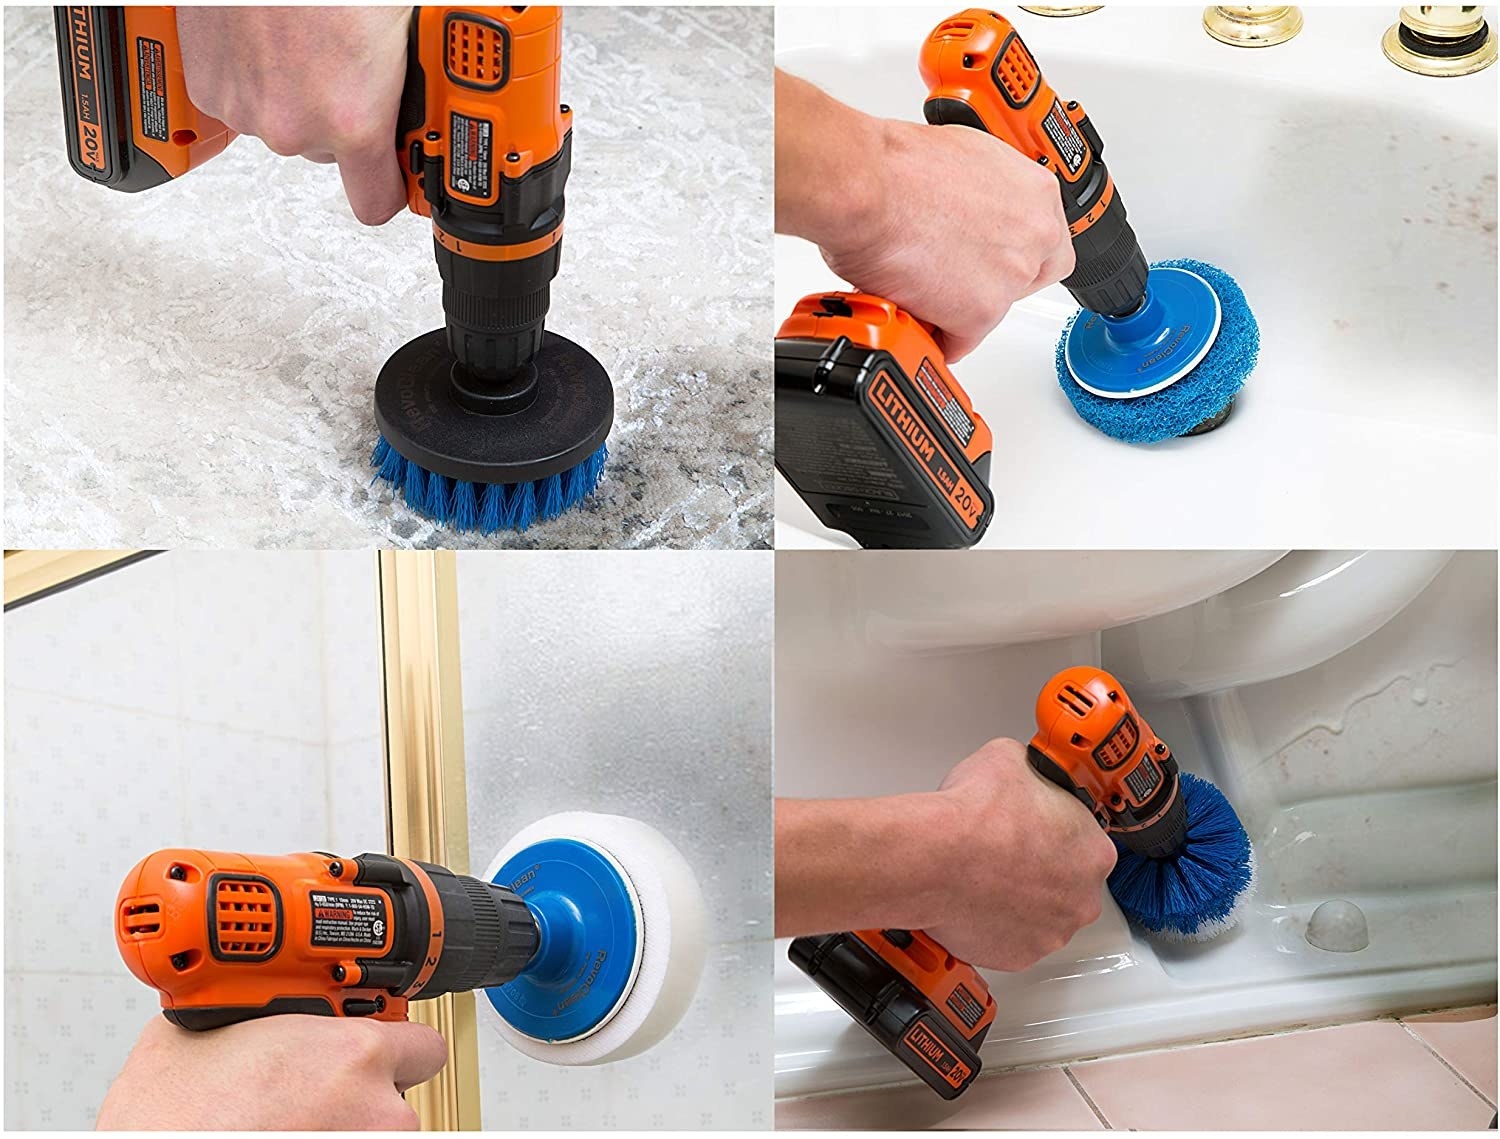 The four brush heads on drills cleaning various areas of a bathroom